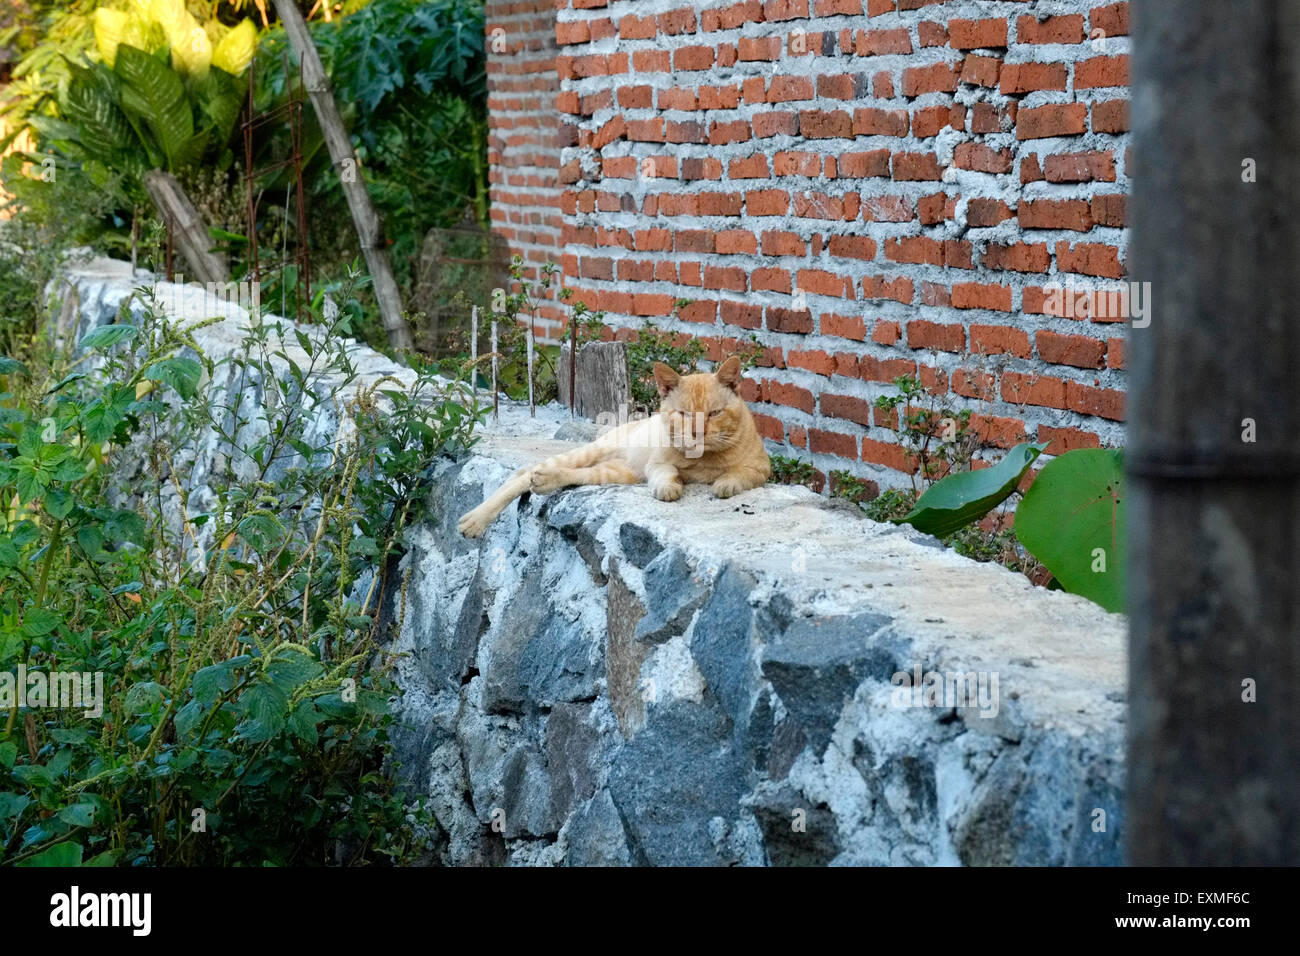 a ginger cat with a scowl on its face sitting on a wall in a rural village in java indonesia Stock Photo